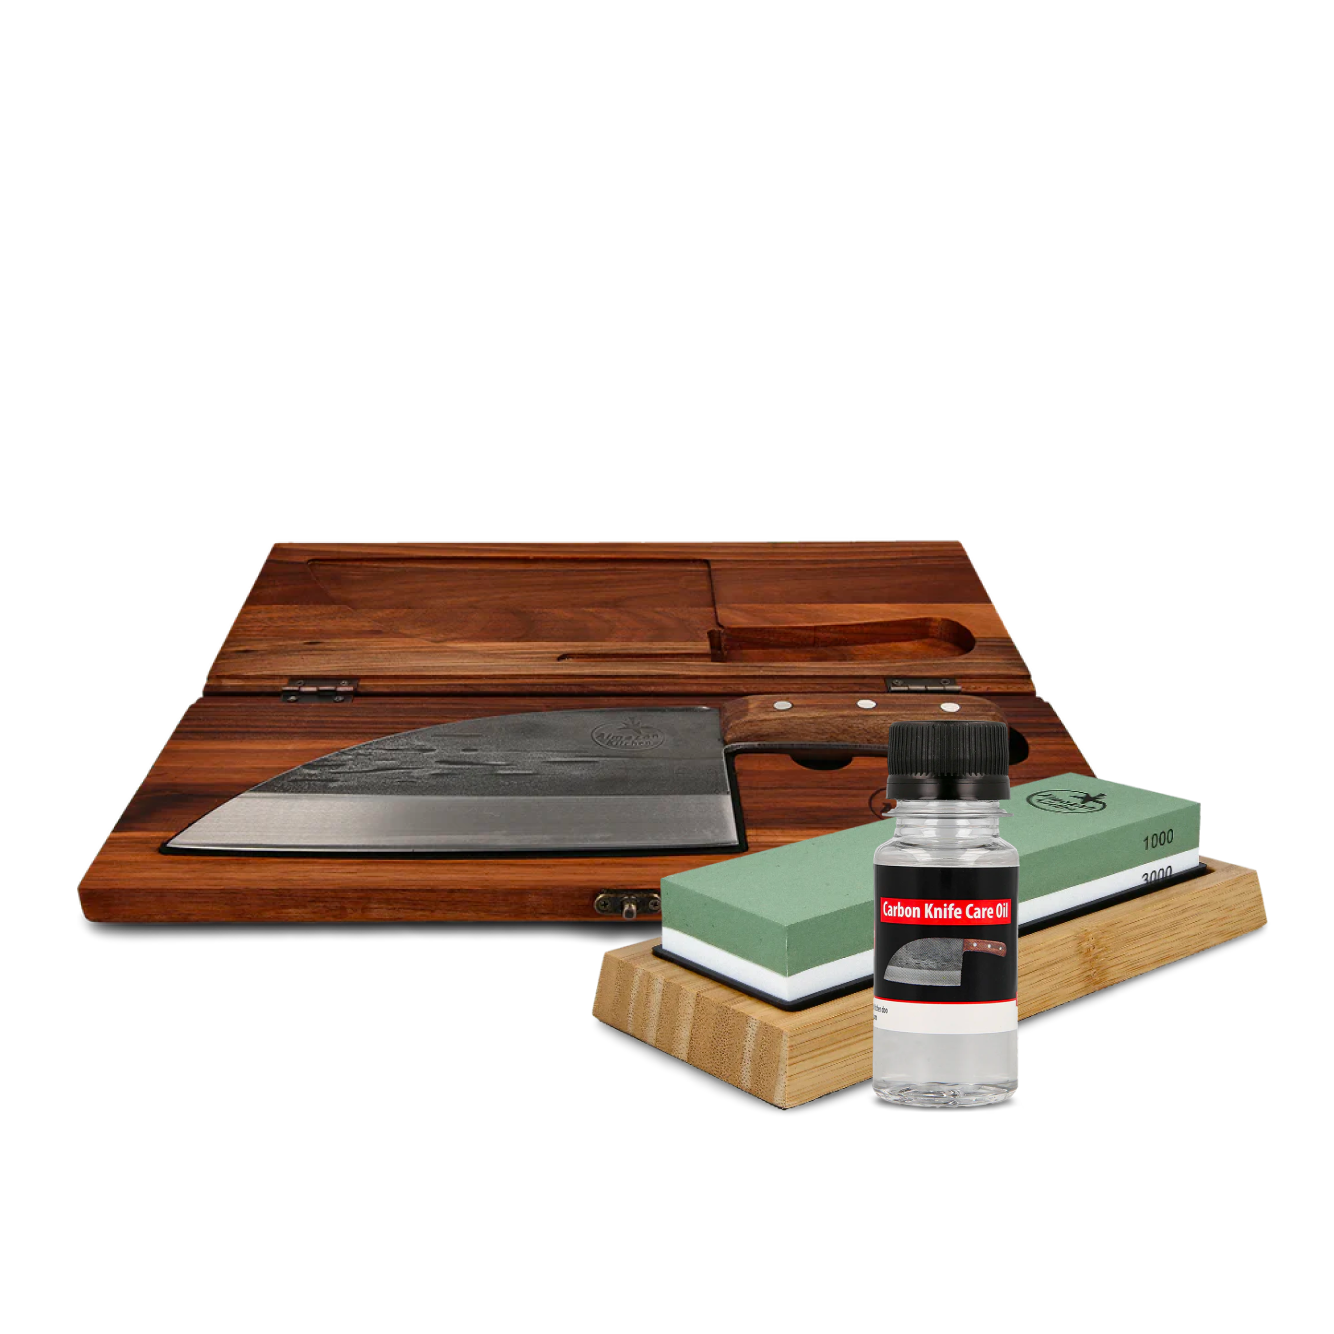 Serbian chef knife inside a walnut box with a sharpening stone set and carbon knife oil in front of it